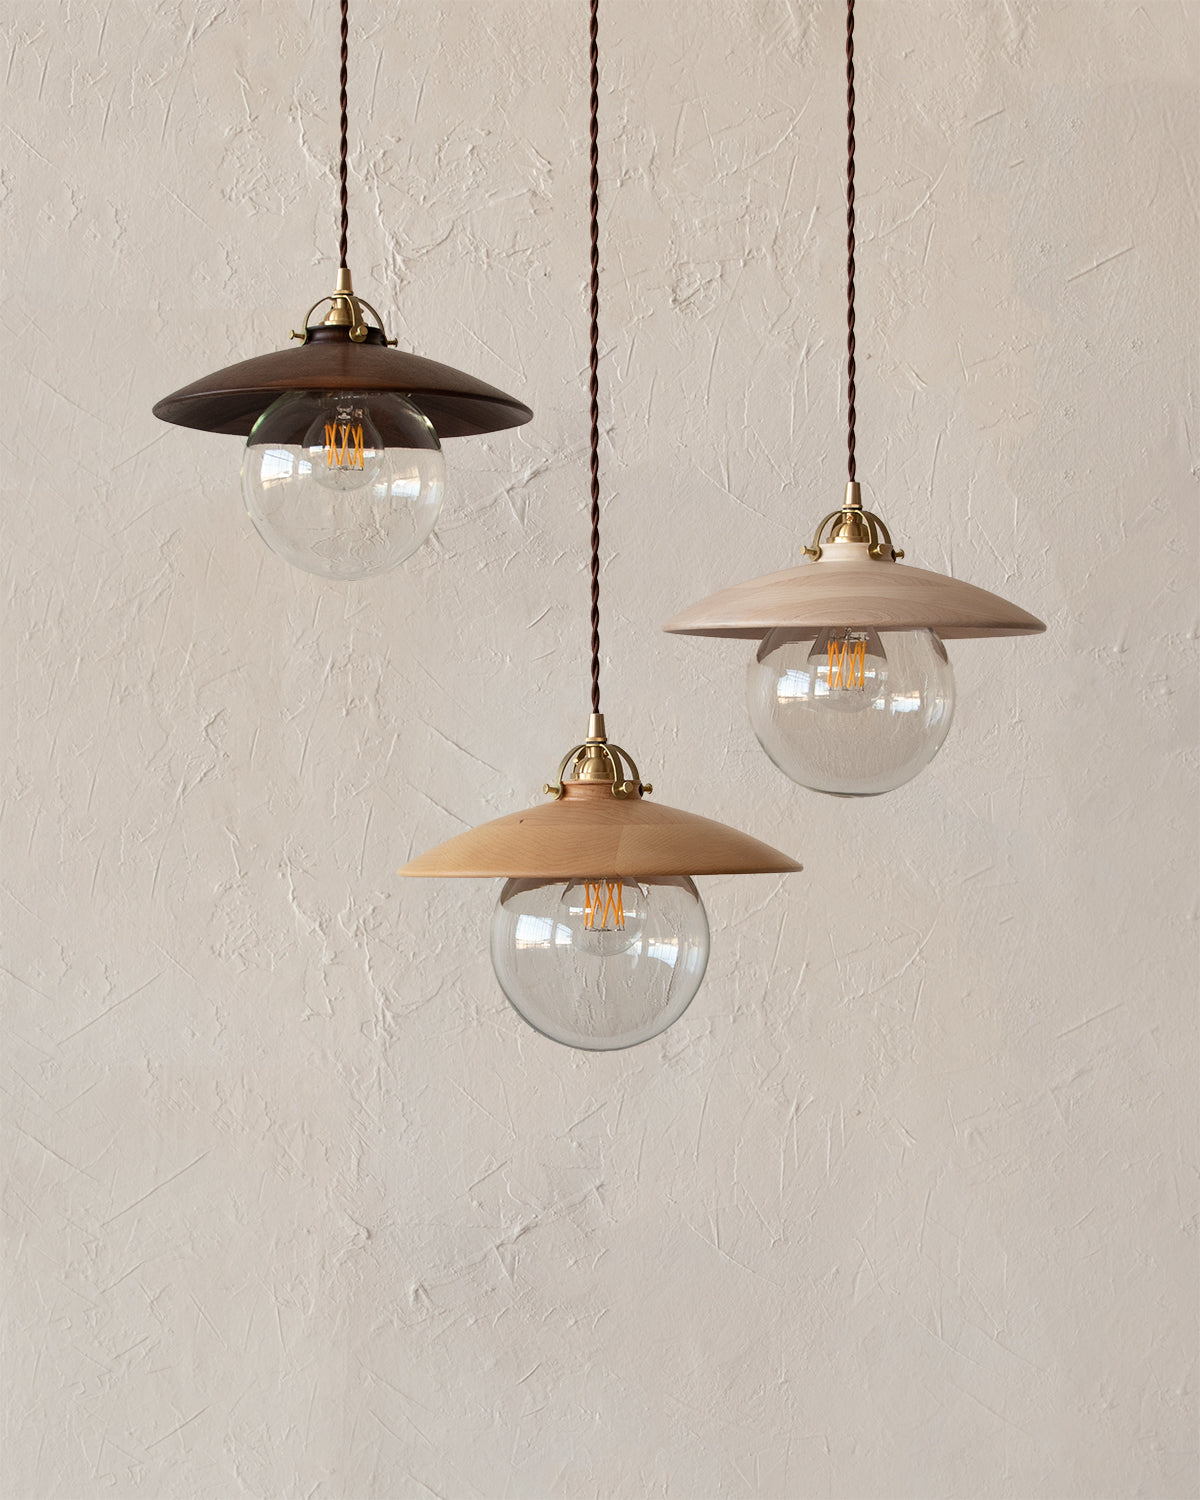 Pendant light with large clear glass globe and decorative wooden clear maple shade. Made by Lostine in Philadelphia. Simple interior design, made in the USA. Warm American Modern Design